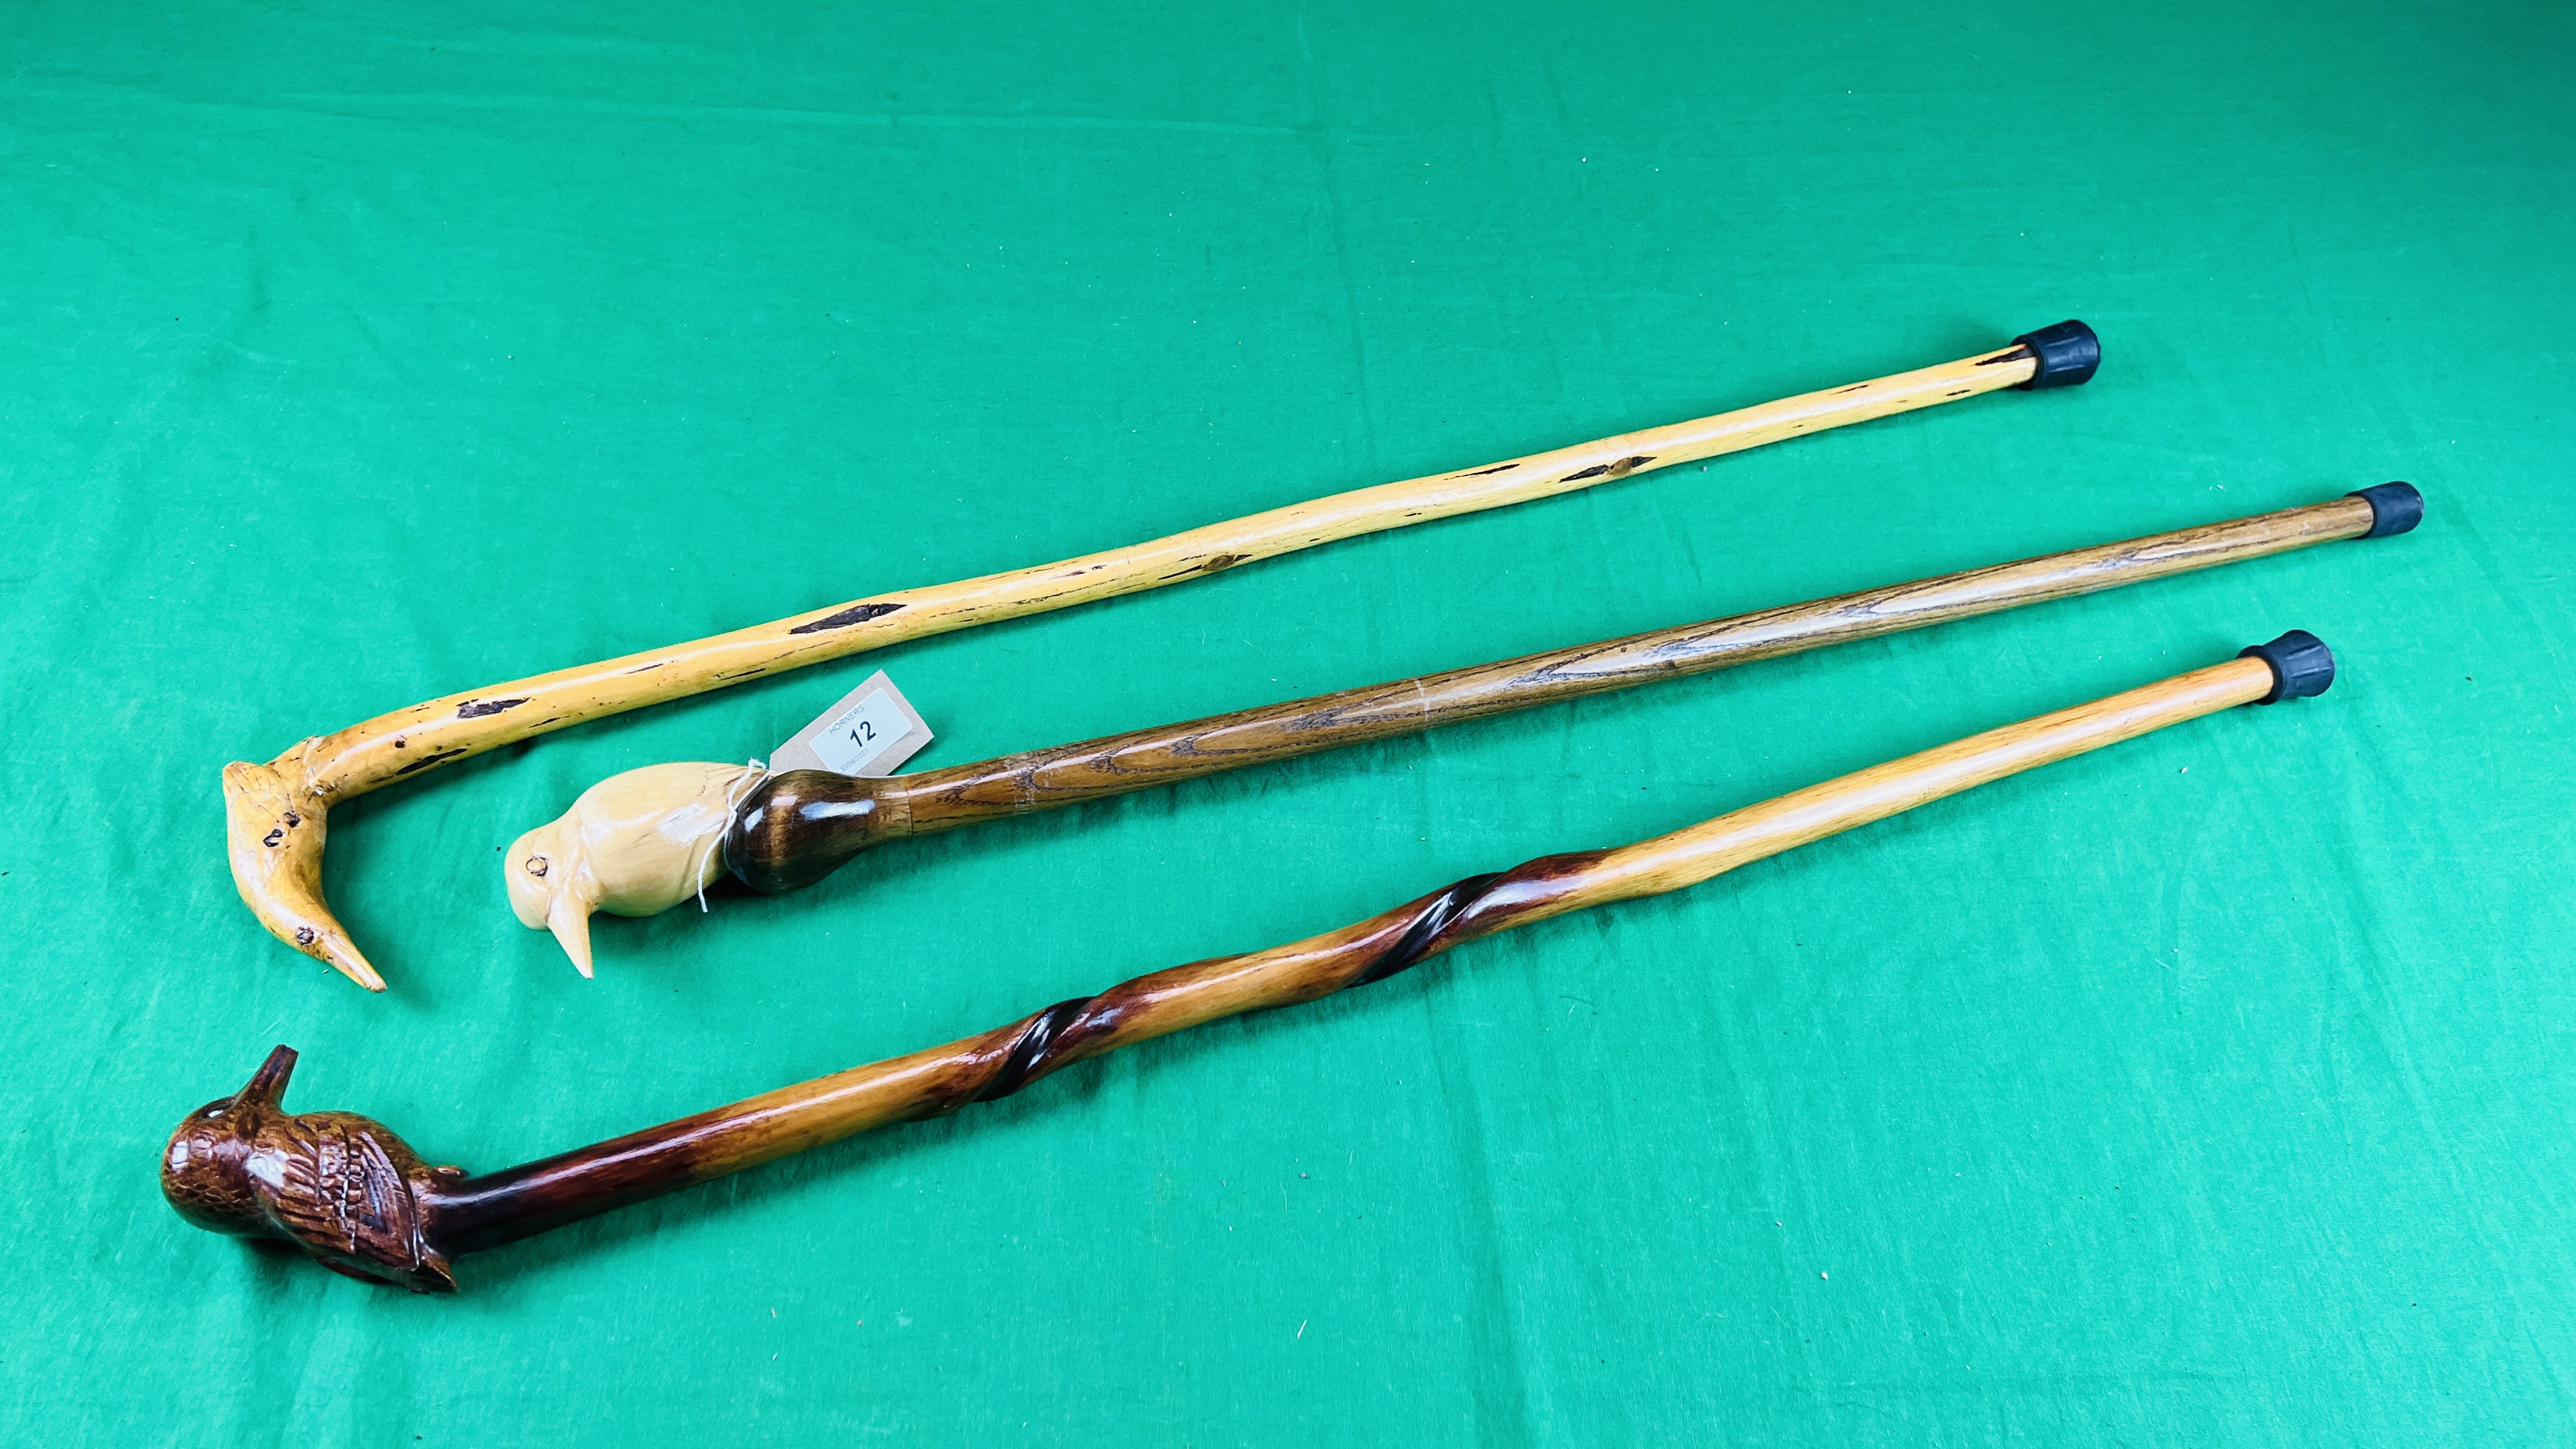 THREE WALKING CANES WITH HAND CARVED KINGFISHER FINIALS (ONE BEAK A/F) - NO POSTAGE OR PACKING - Image 5 of 5